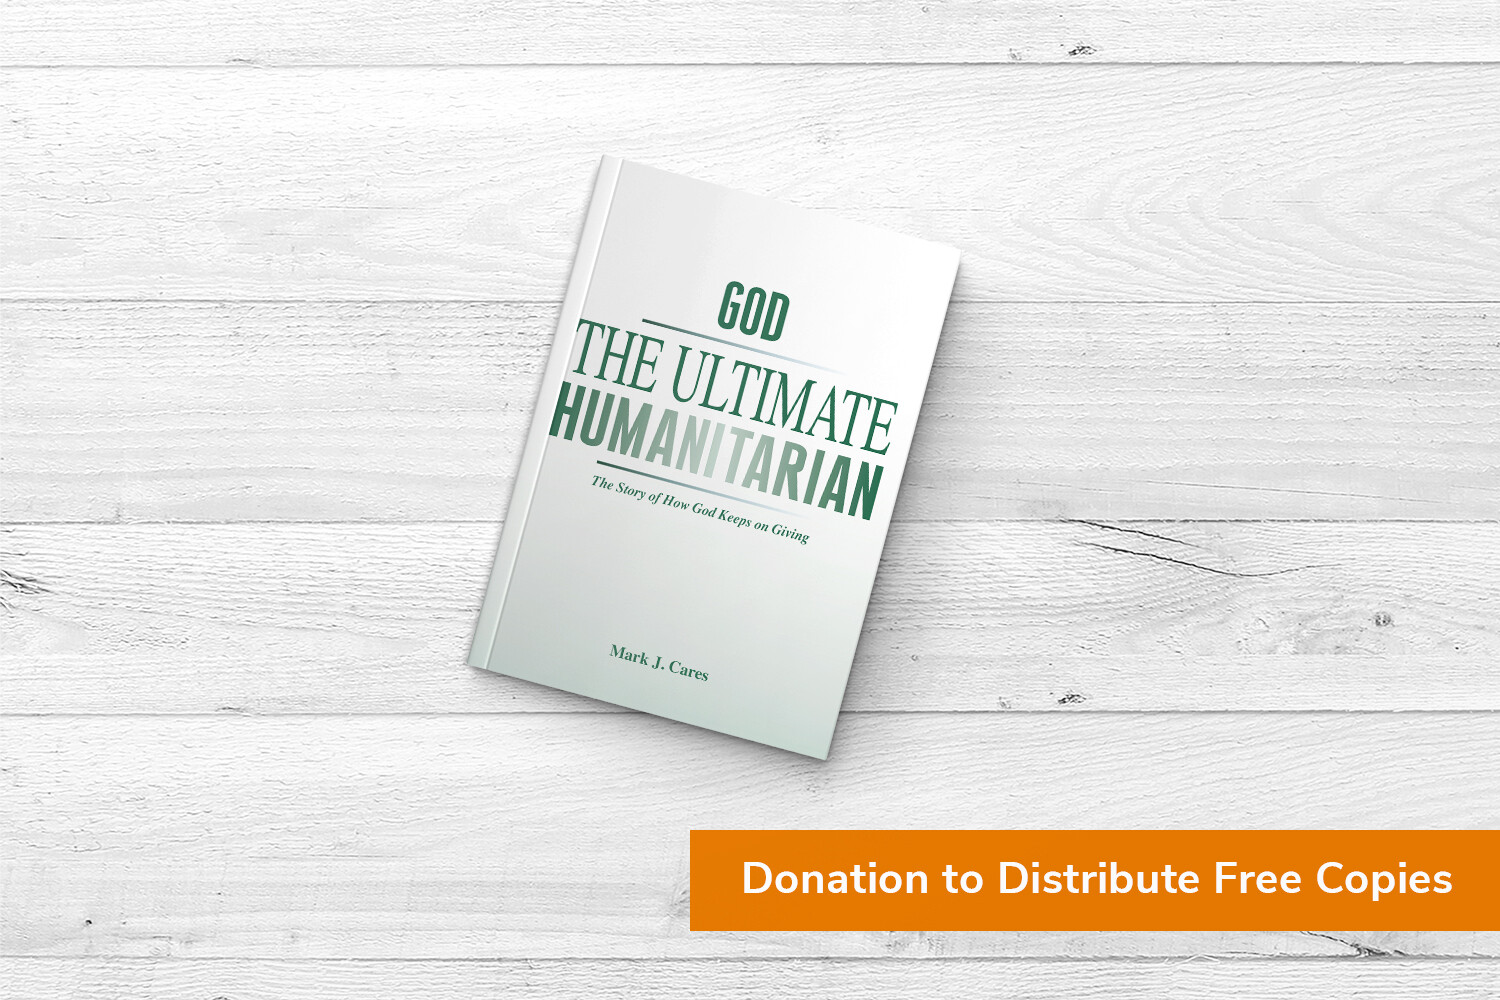 Donation to distribute FREE copies